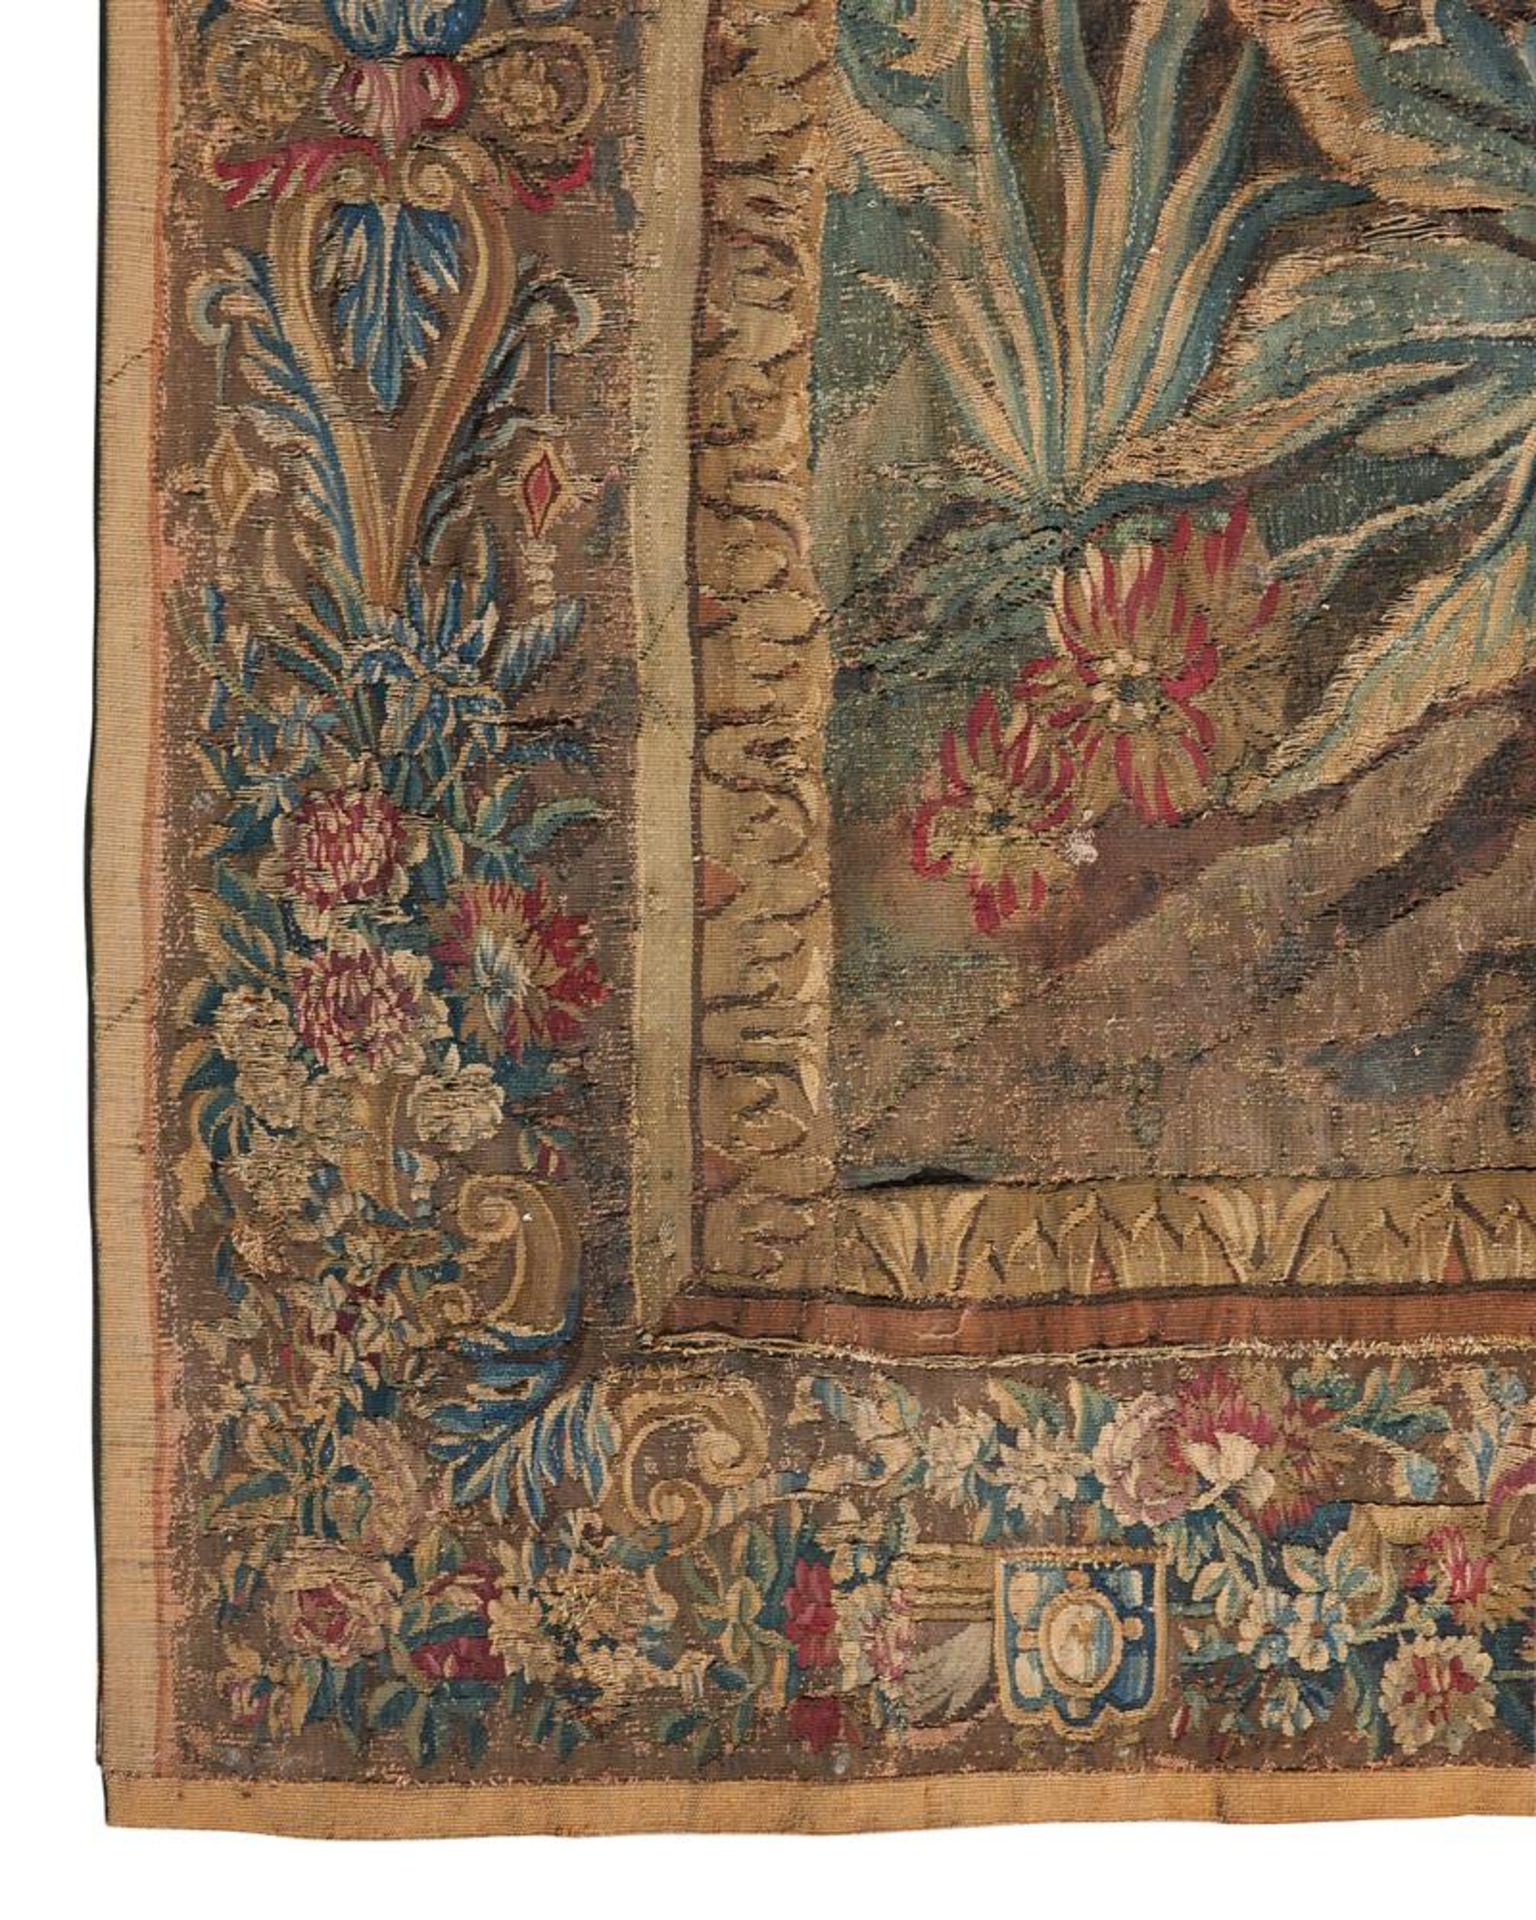 A FRENCH VERDURE TAPESTRY, EARLY 18TH CENTURY - Image 4 of 5